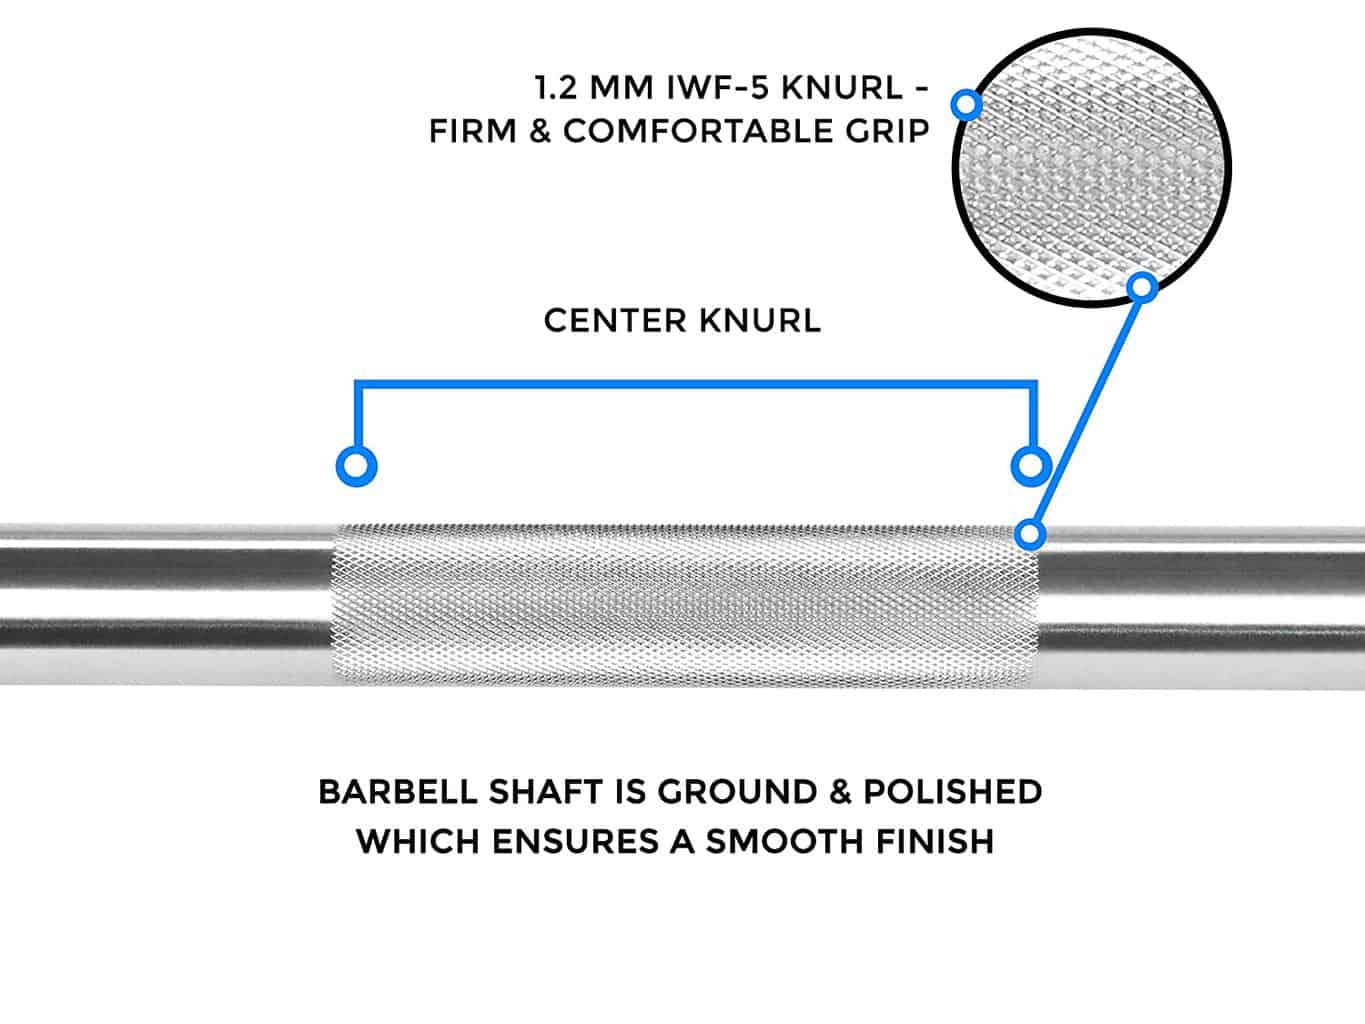 No center knurl and with center knurling